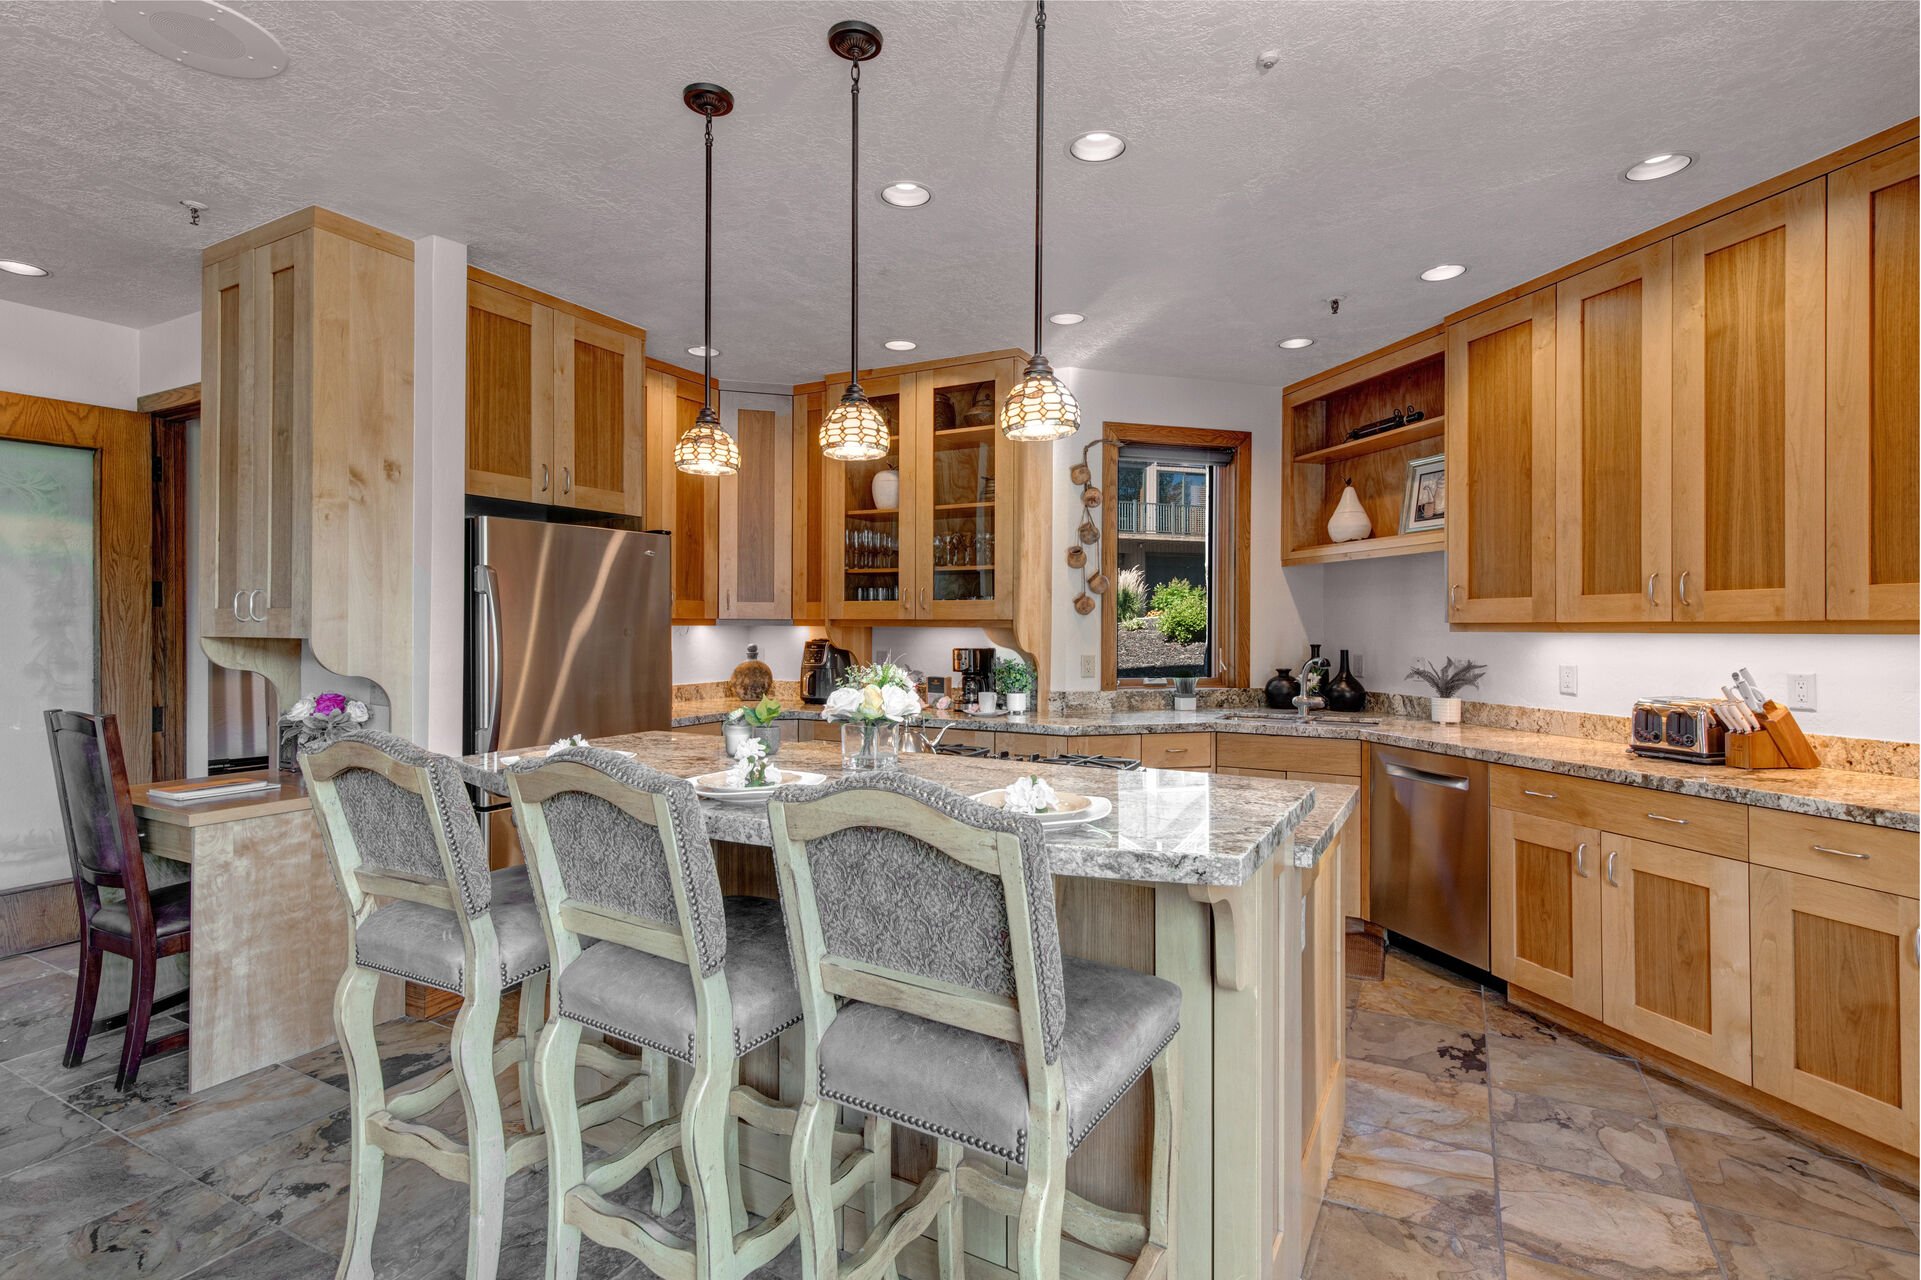 Fully Equipped Kitchen with gorgeous stone countertops, stainless steel appliances, private deck access, and island seating for 3